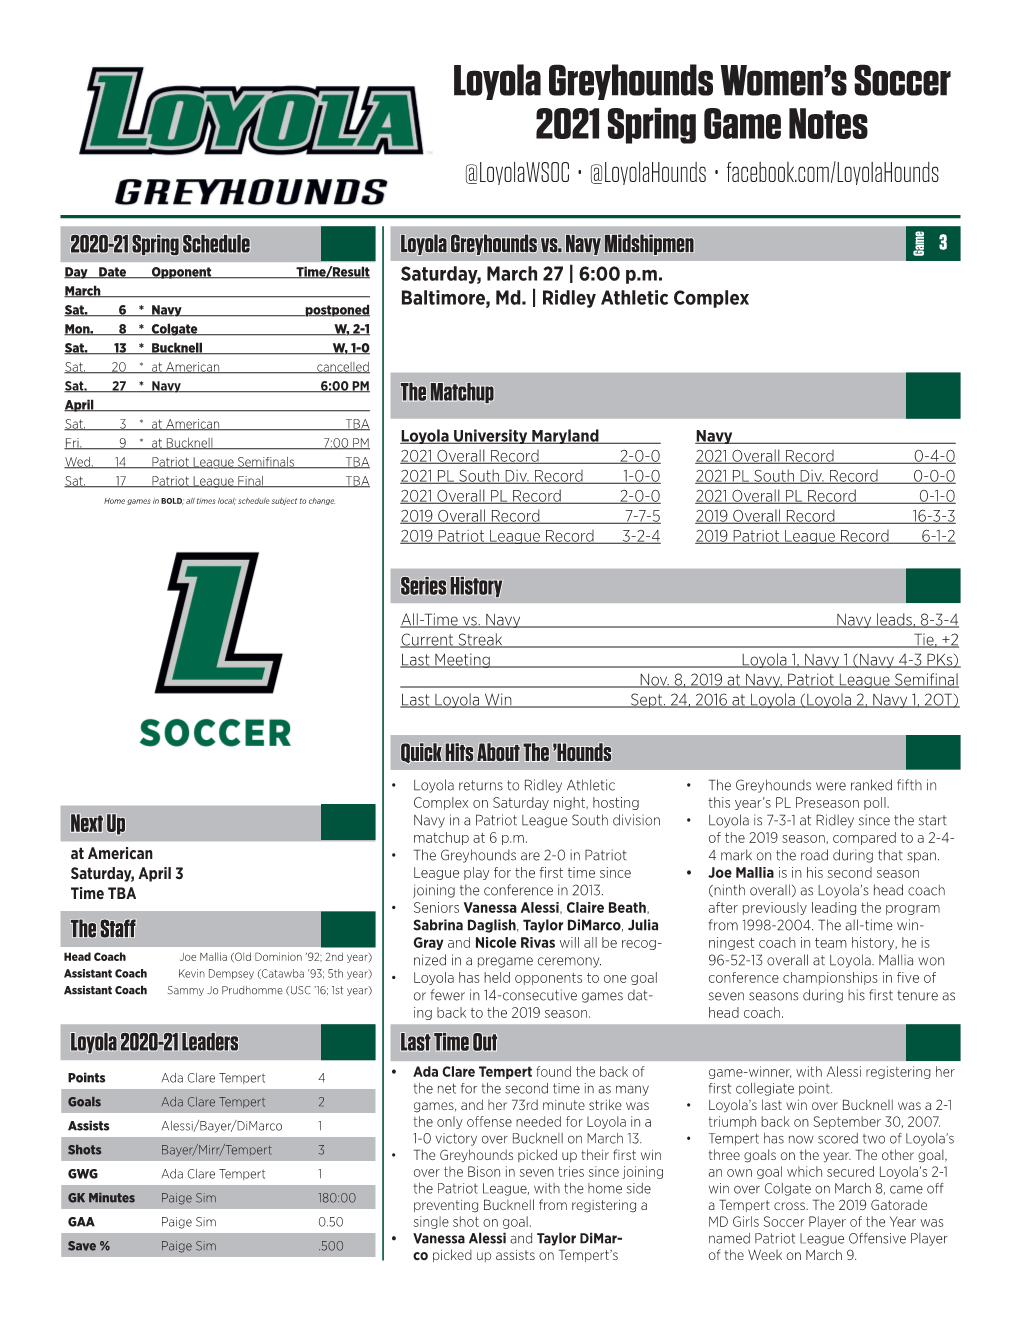 Loyola Greyhounds Women's Soccer 2021 Spring Game Notes